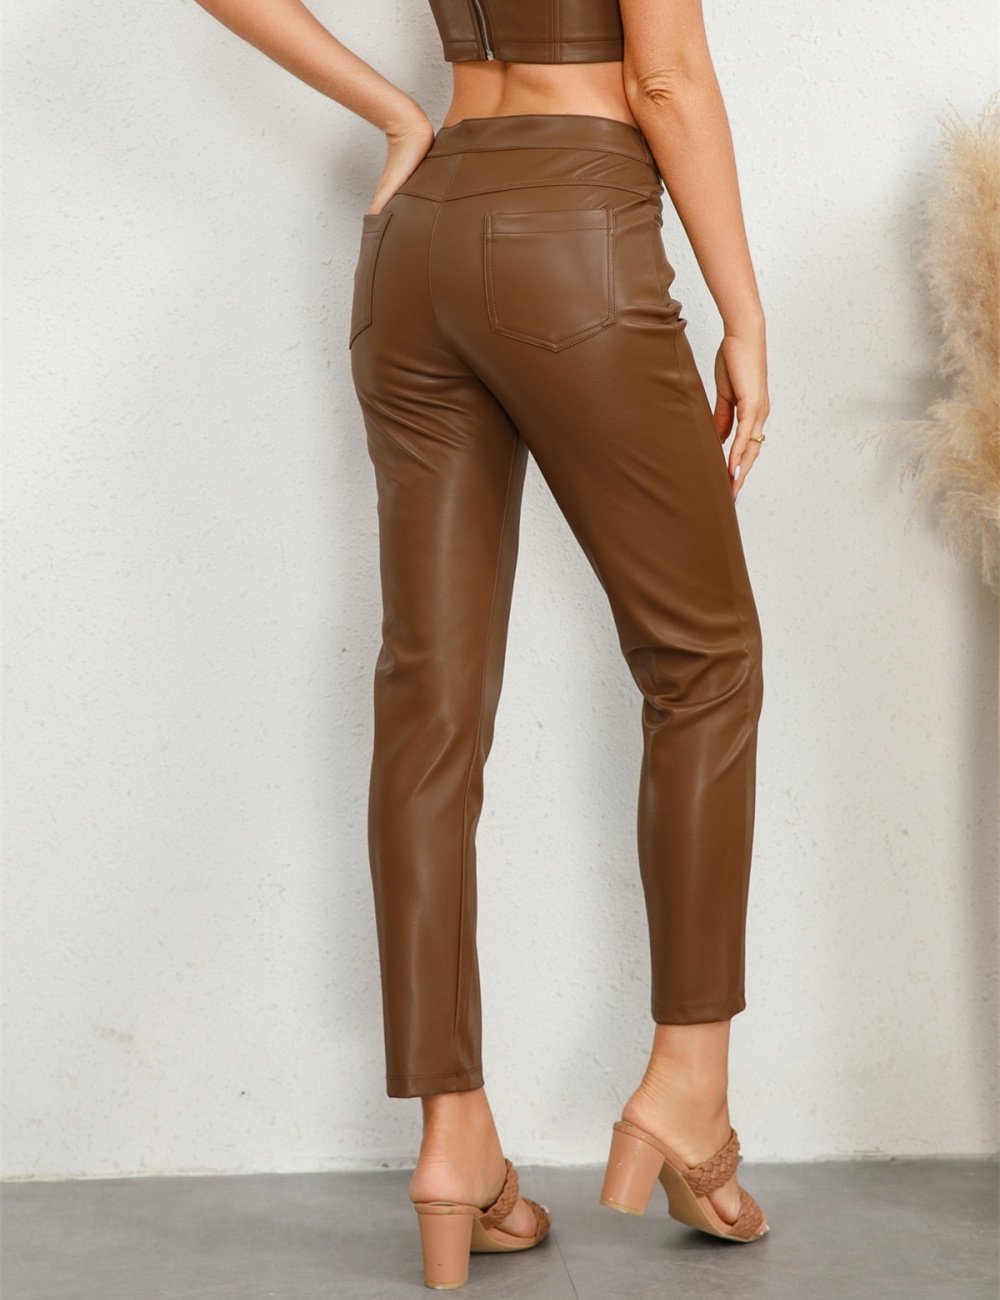 Fashion autumn and winter leather pants low-waist pants